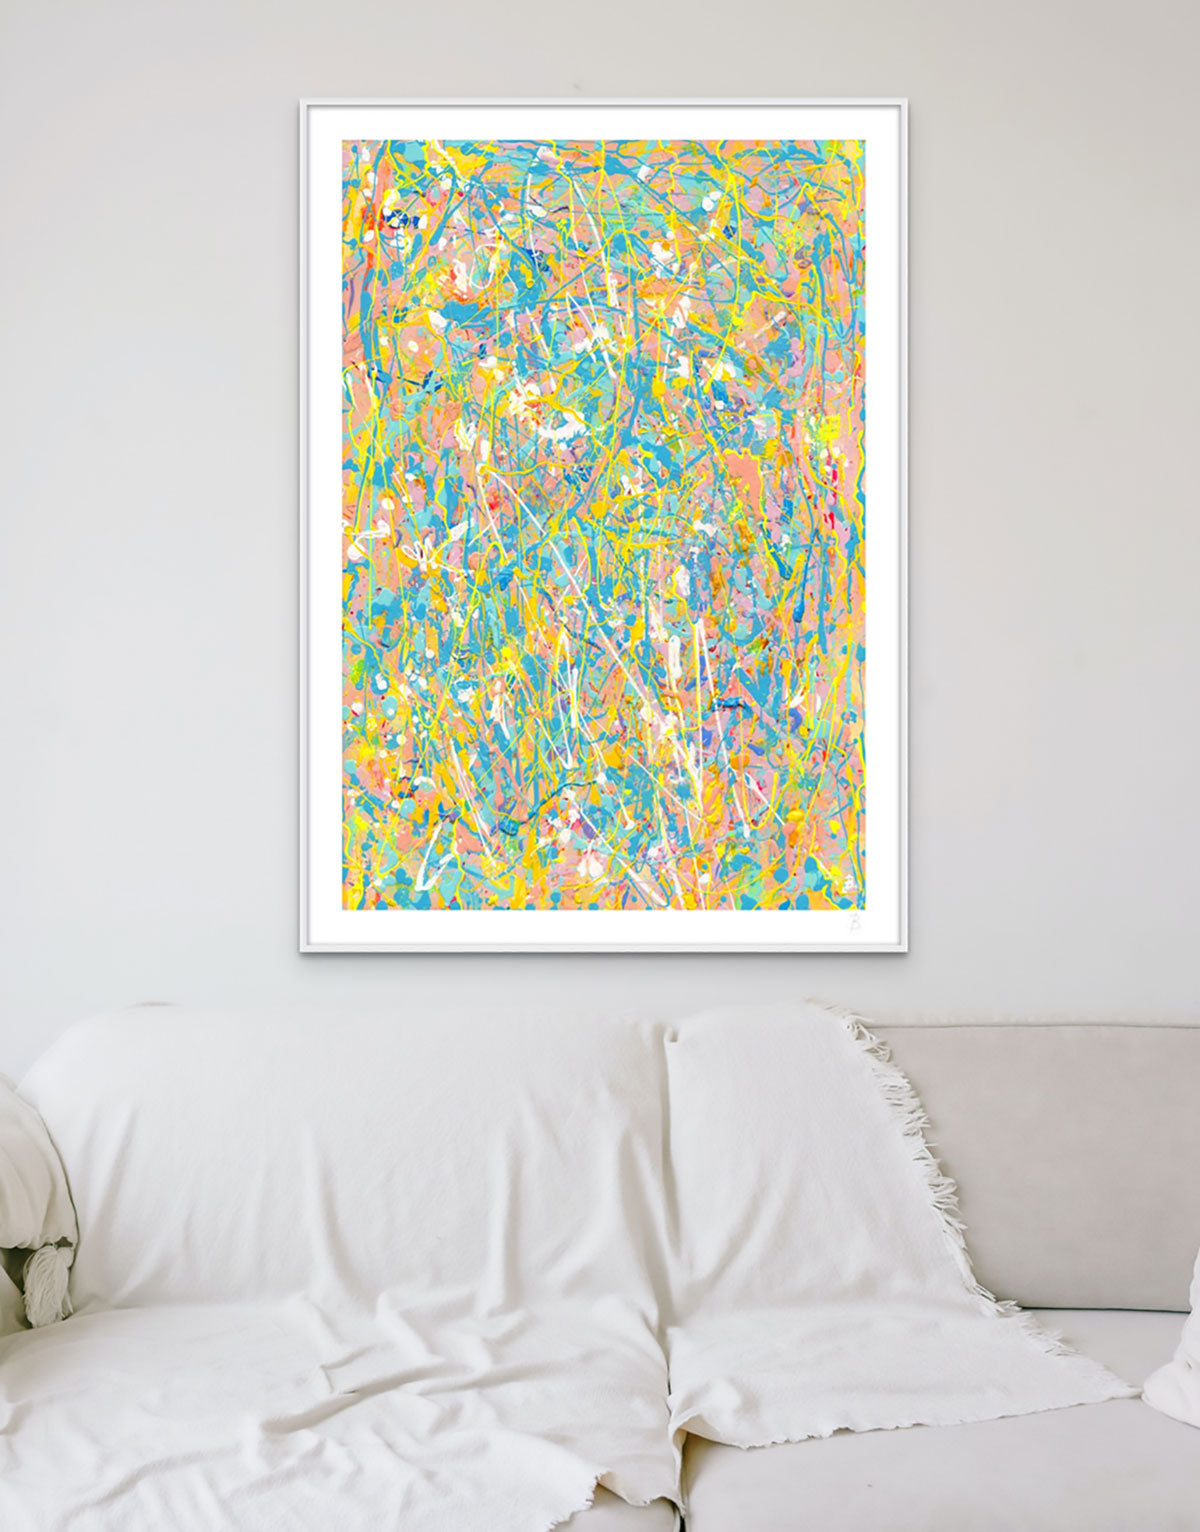 'Naked' Fine Art Print seen when Framed in Solid White Shadow Box Frame Hanging Above a Beige Sofa with Throw. Lareg Fien Art Prints Available framed or Unframed Options